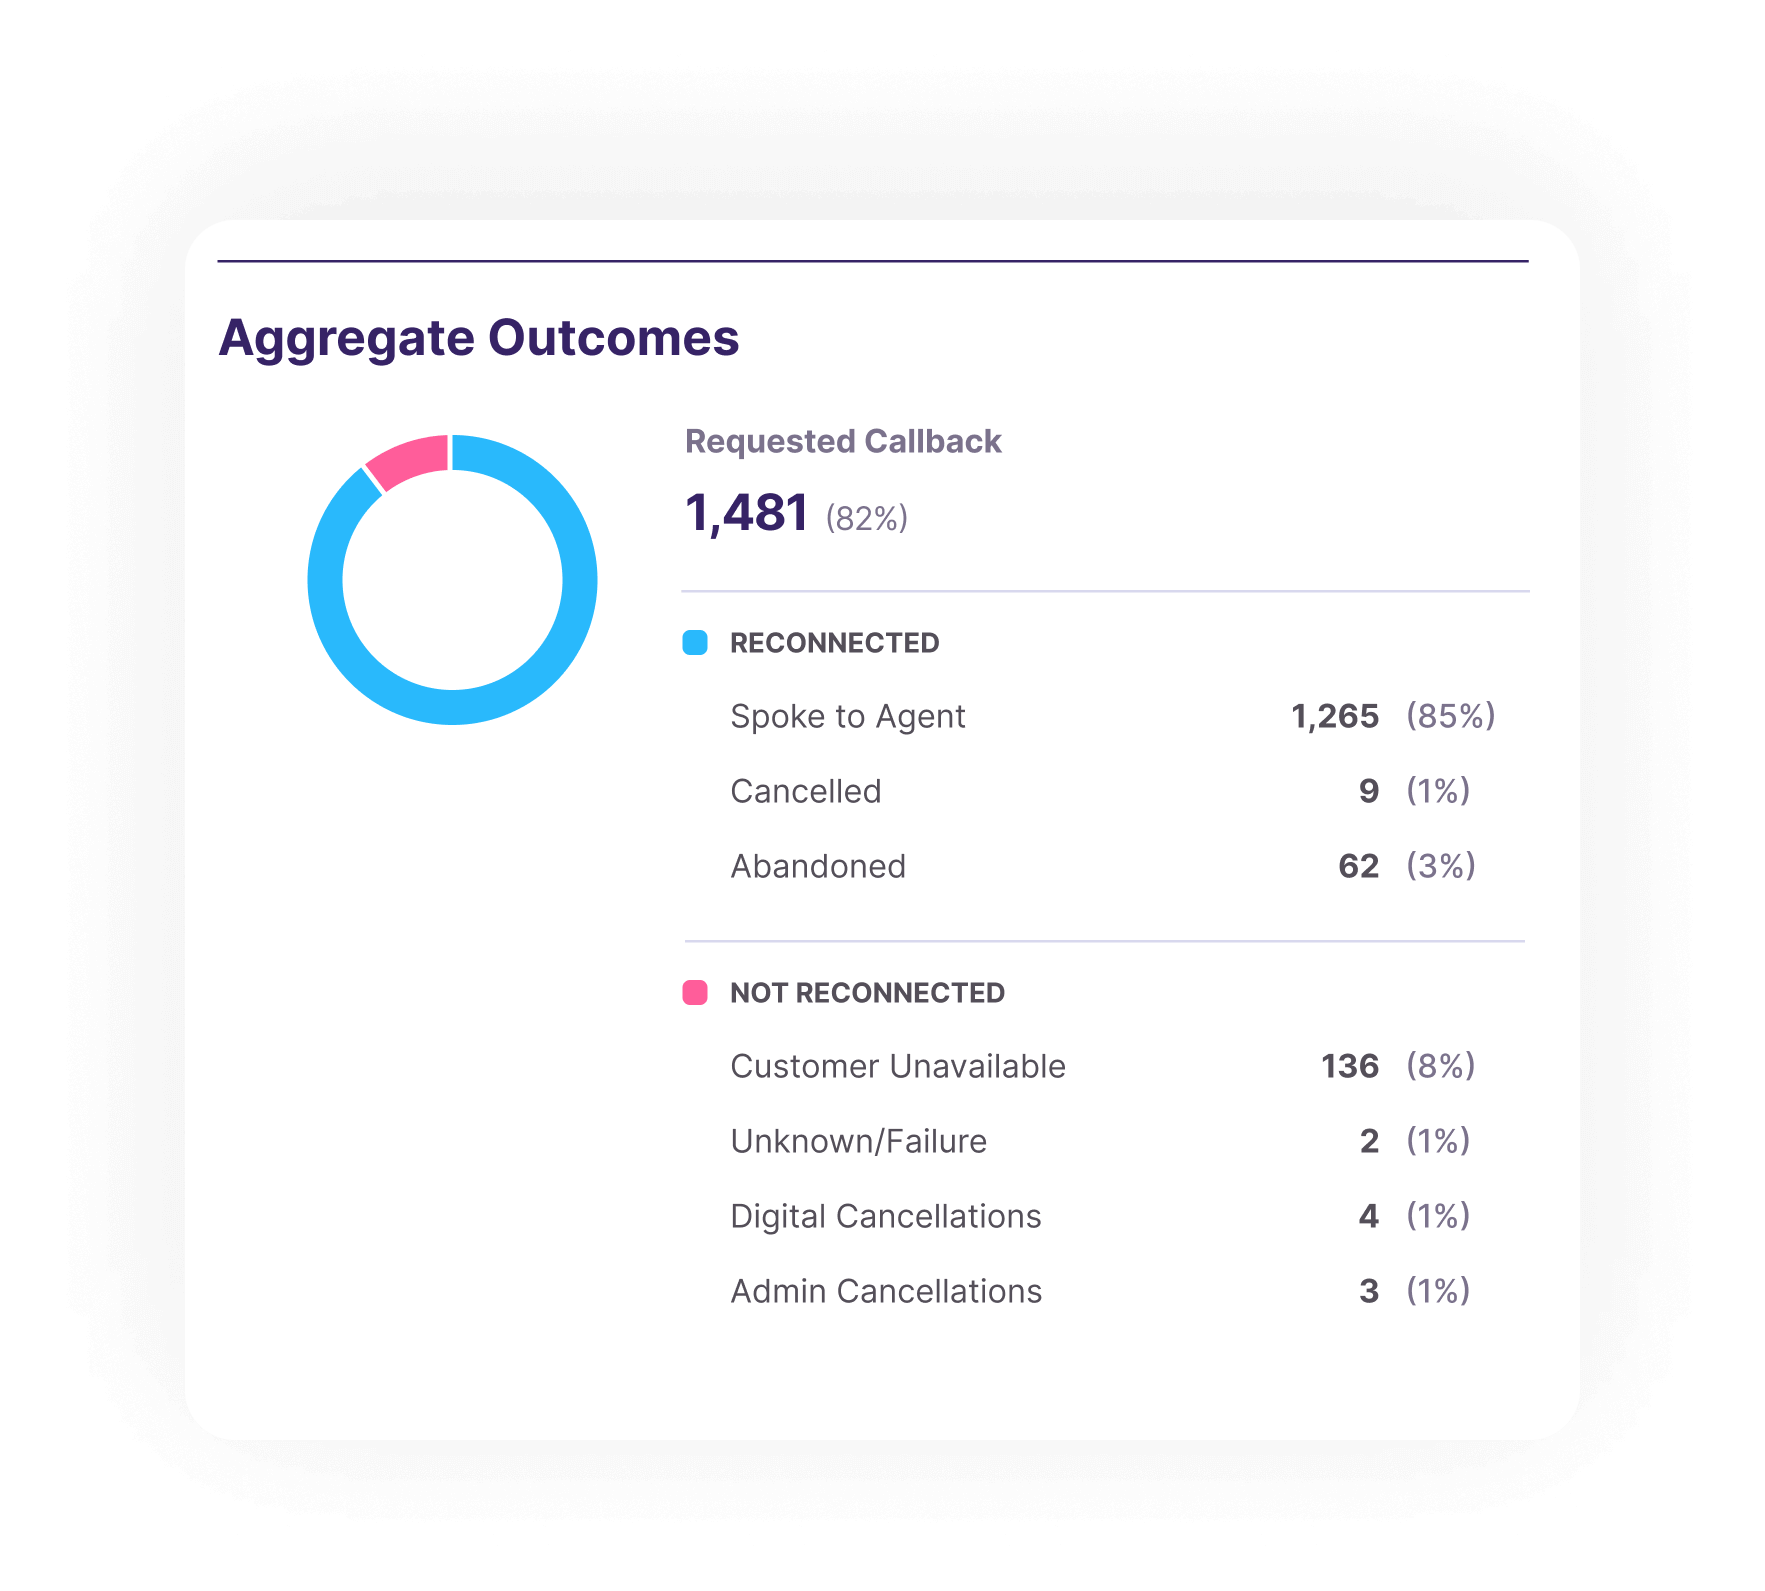 The Aggregate Outcomes section of Mindful's Executive Summary, showing percent of requested callbacks and those reconnected.